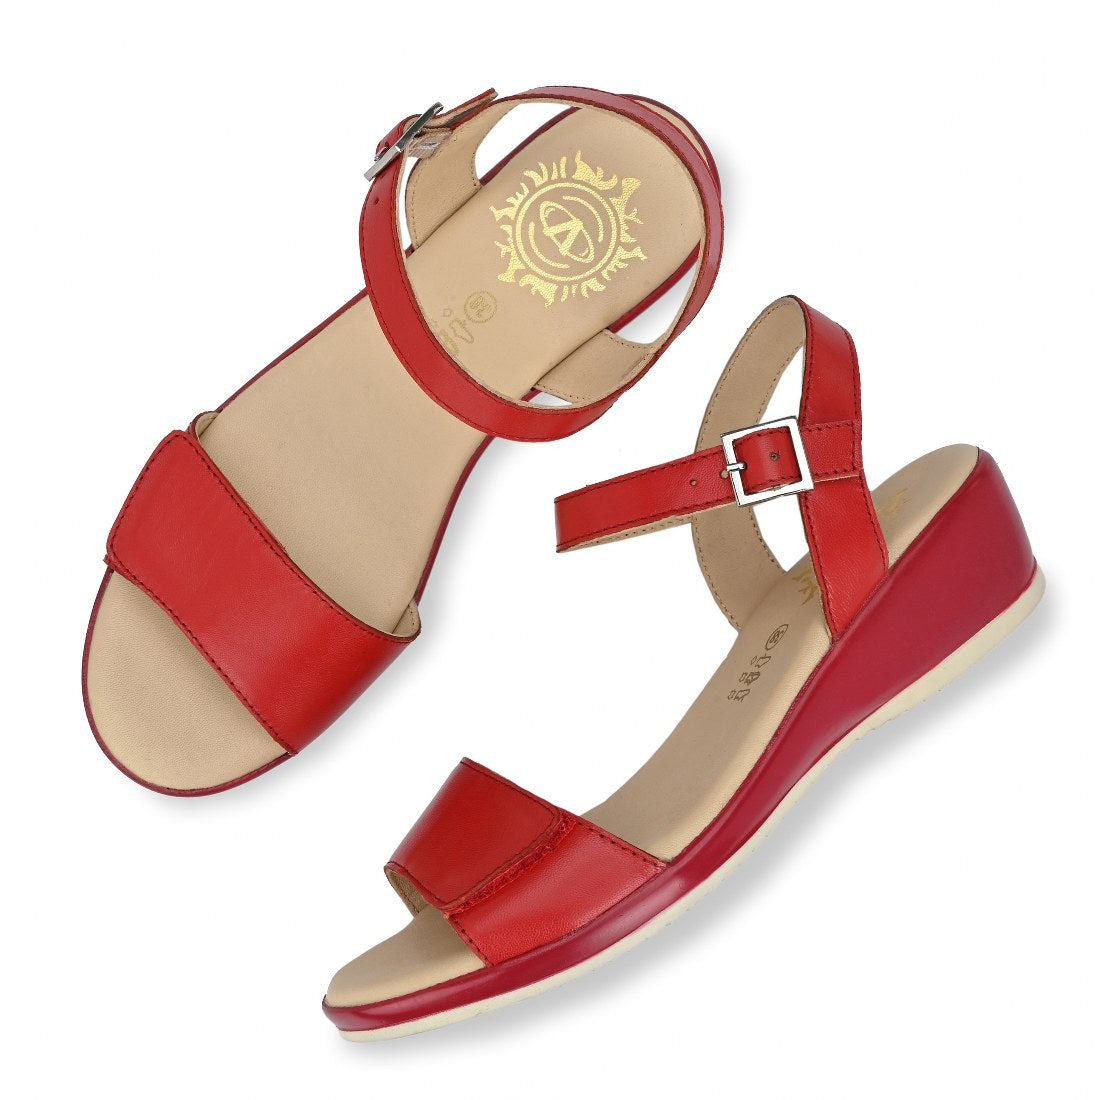 W-HR-FRISCO-51 WOMEN LEATHER RED CASUAL SANDAL OPEN